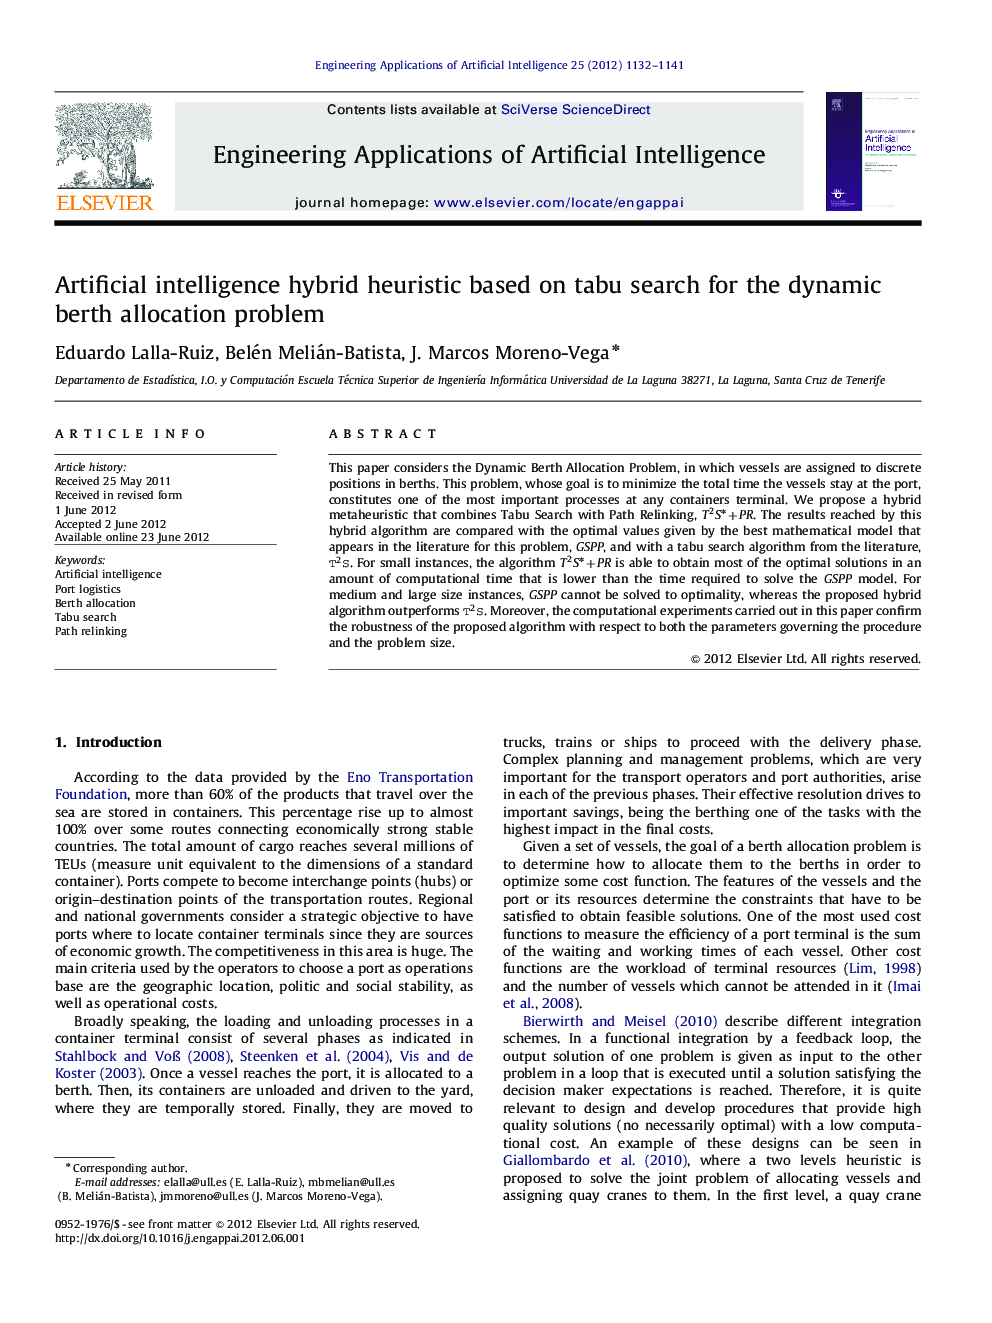 Artificial intelligence hybrid heuristic based on tabu search for the dynamic berth allocation problem